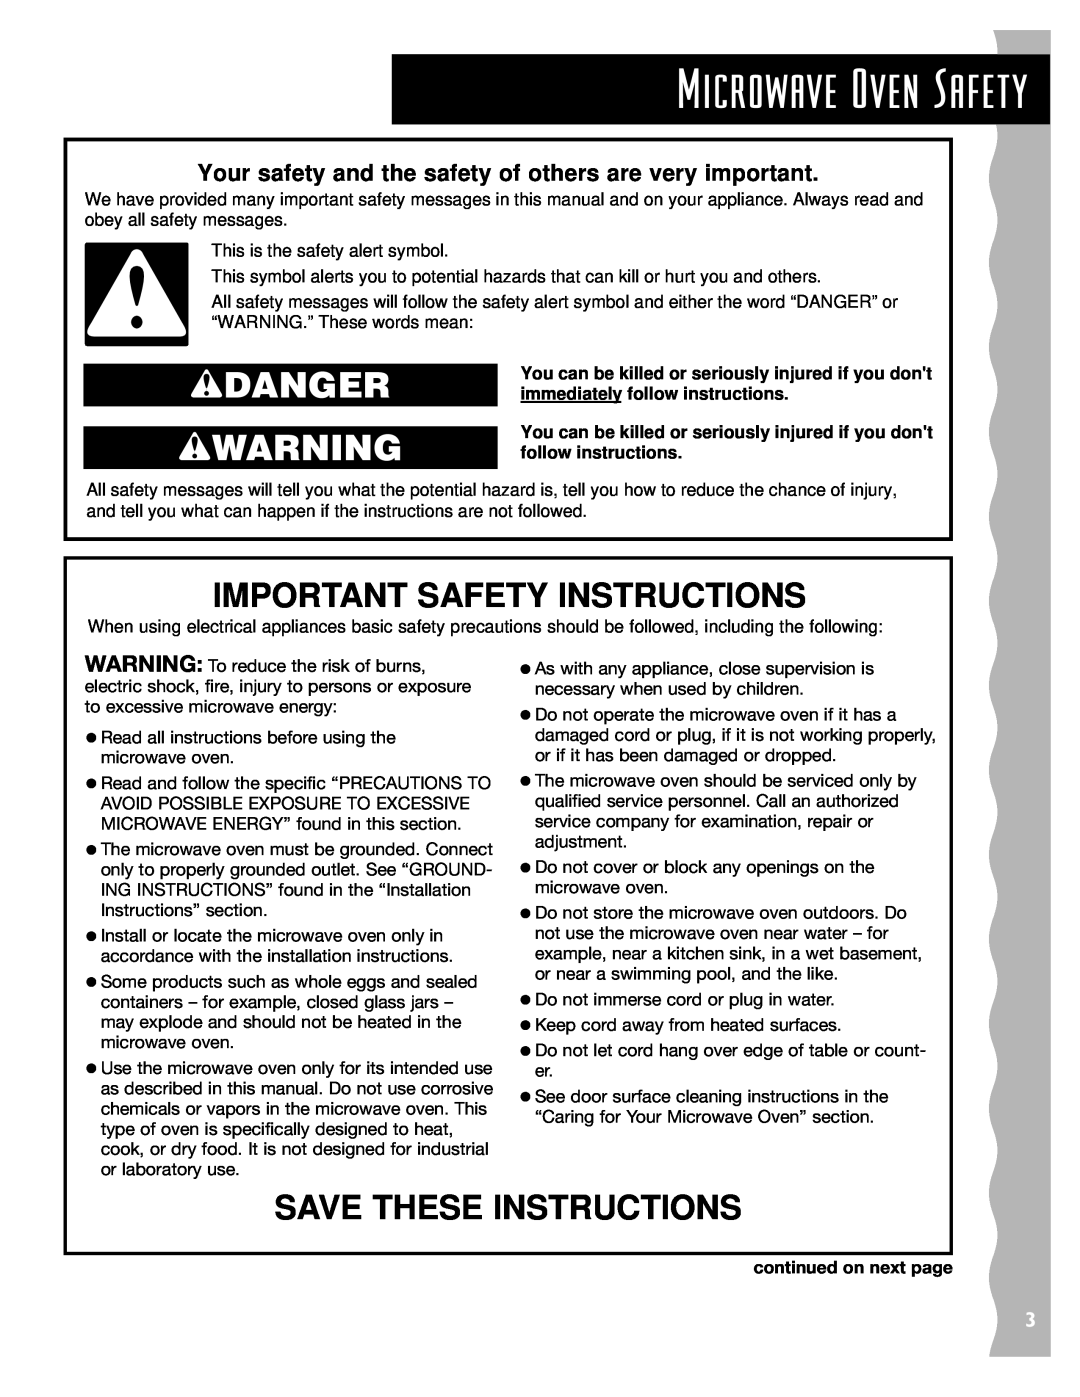 KitchenAid KCMC155JWH Microwave Oven Safety, wDANGER wWARNING, Important Safety Instructions, Save These Instructions 